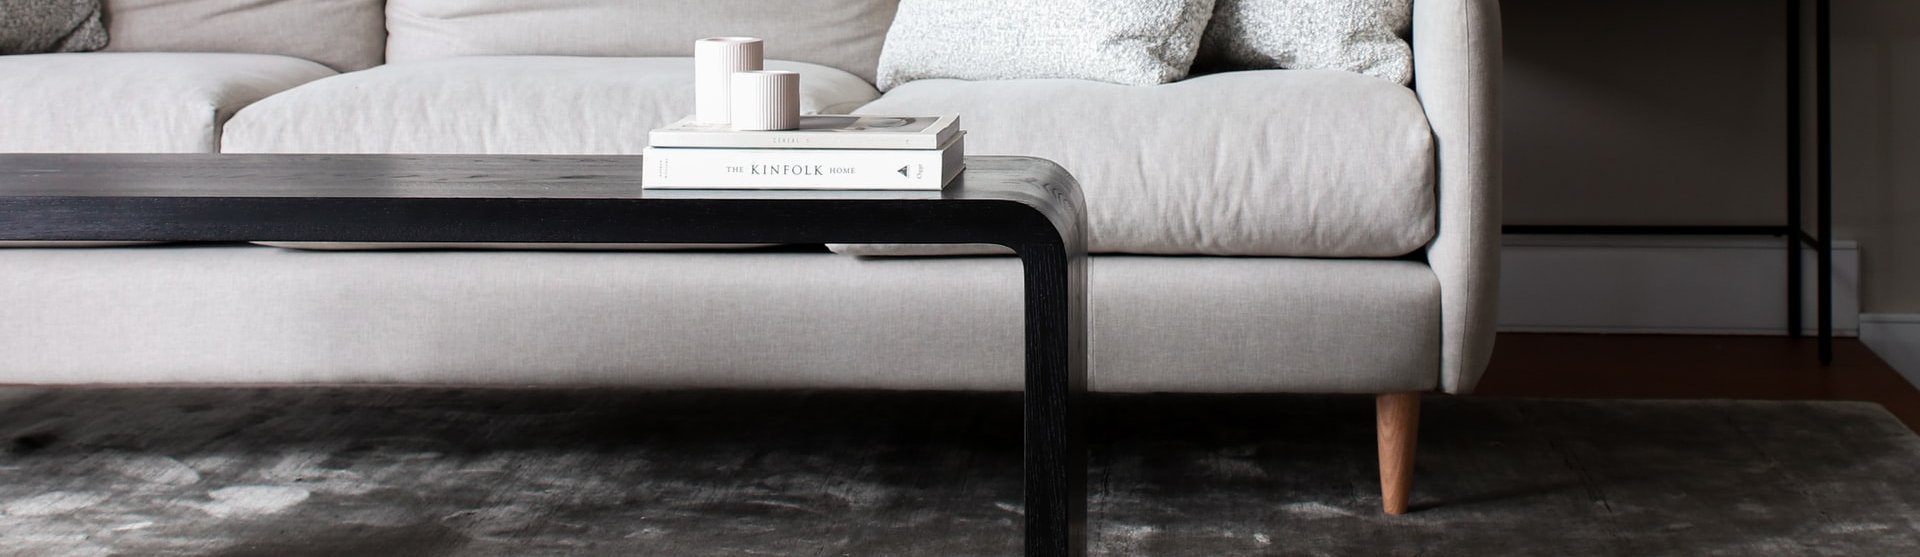 white couch and black coffee table on a brown hardwood floor from The Carpet Store in Oklahoma City, OK